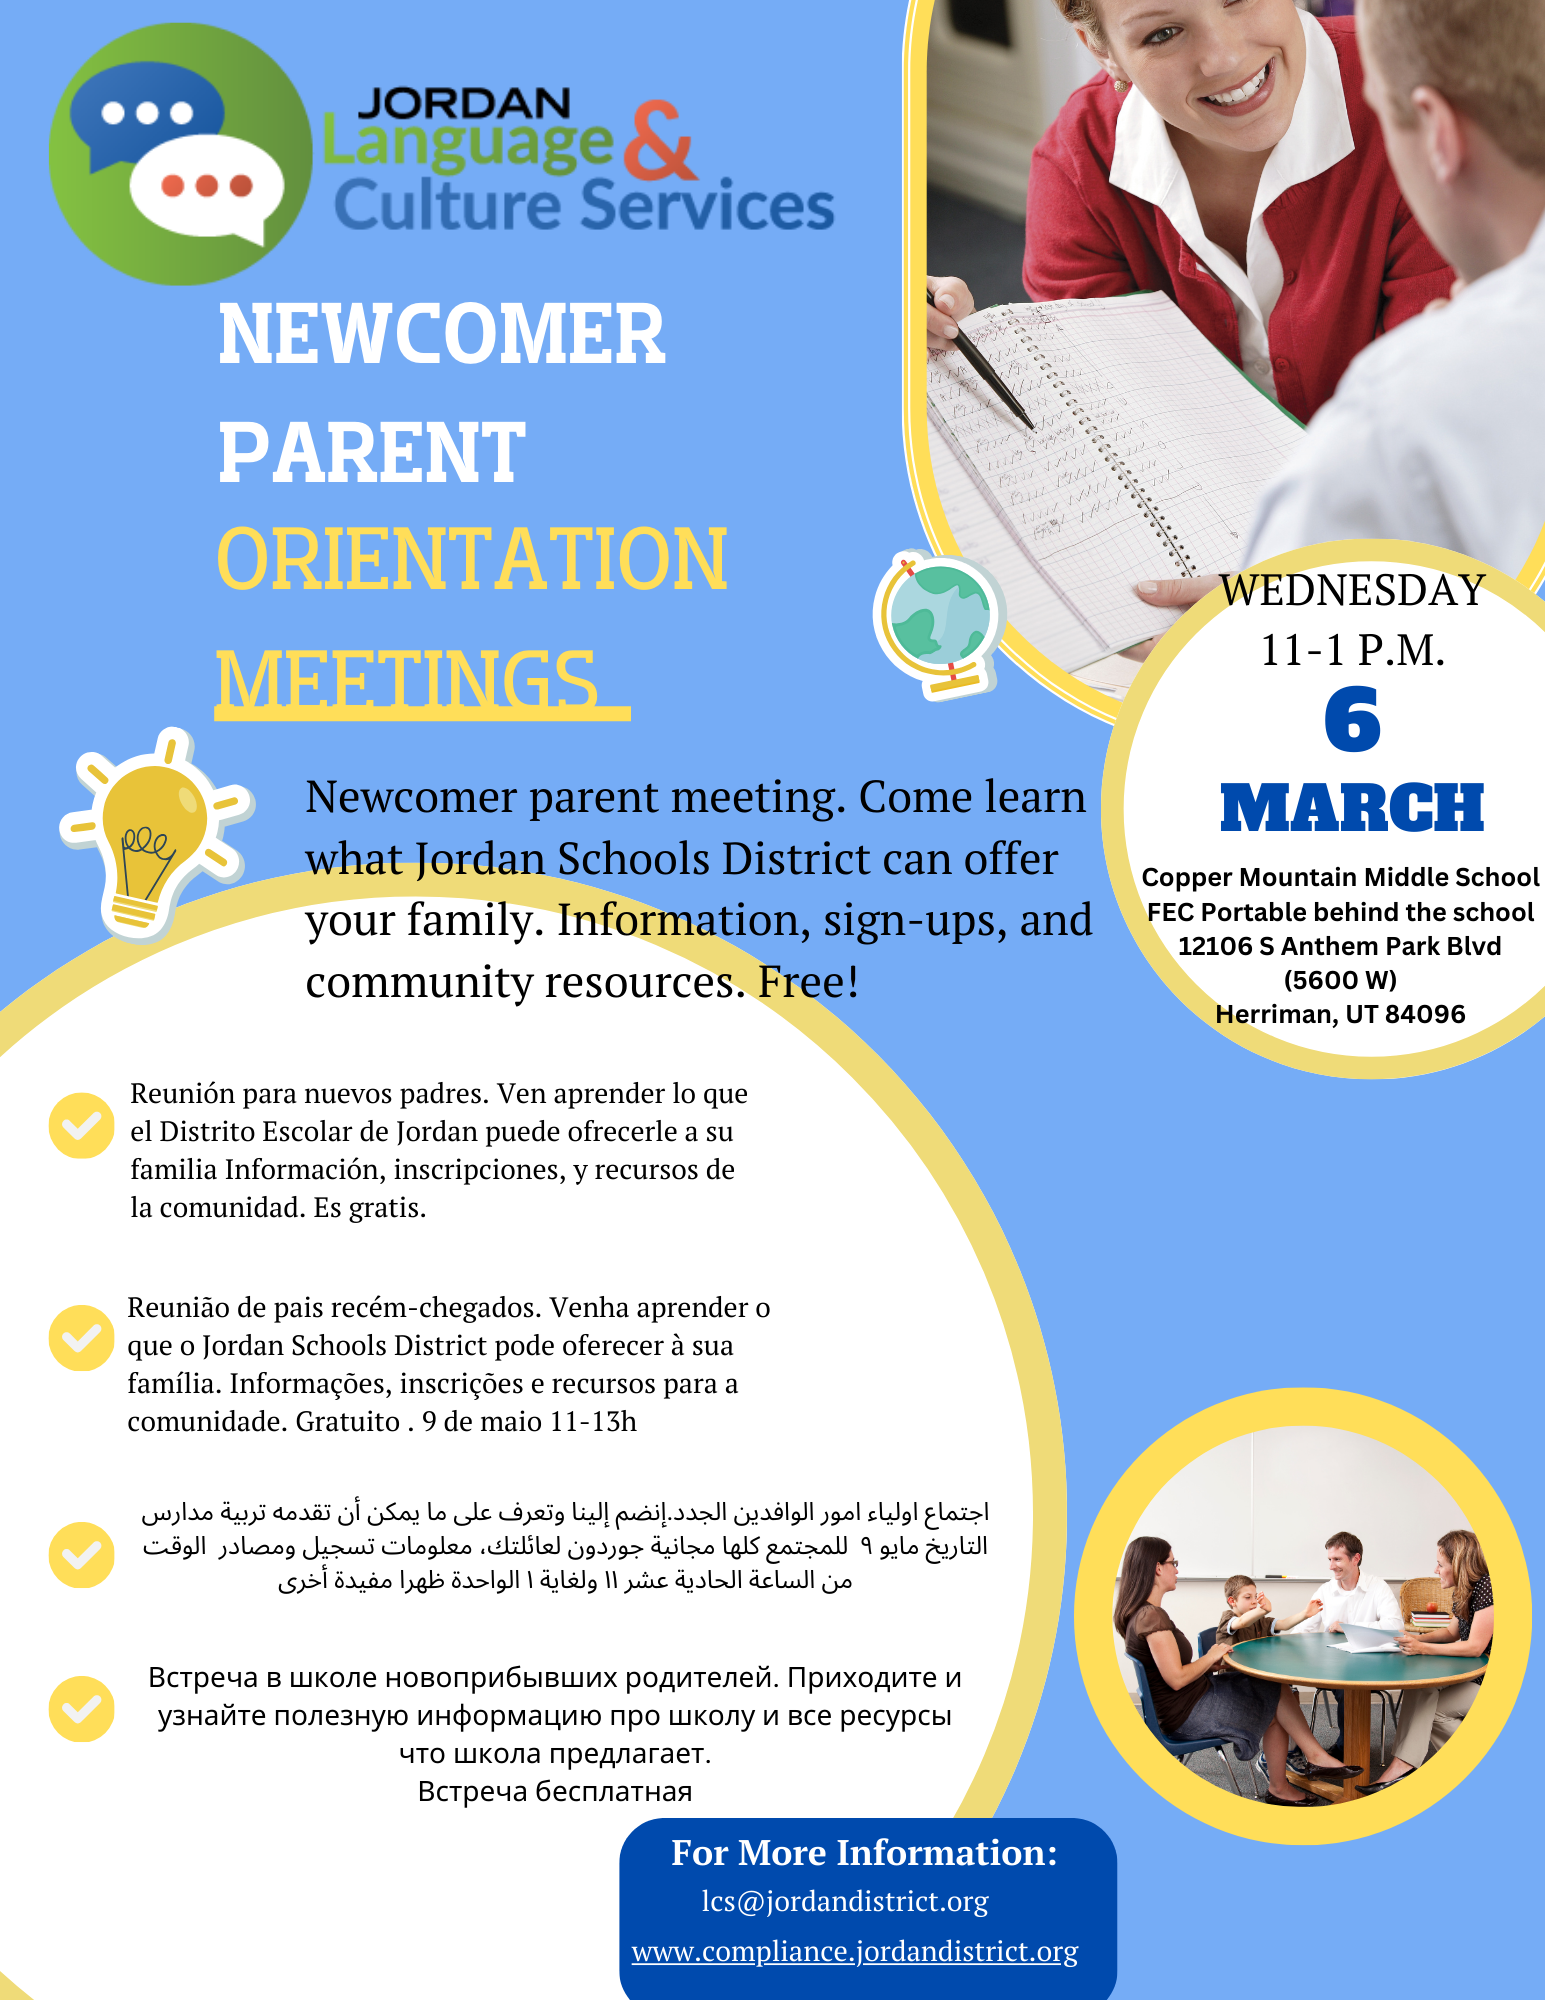 LCS Newcomer Parent Orientation Meeting Flyer